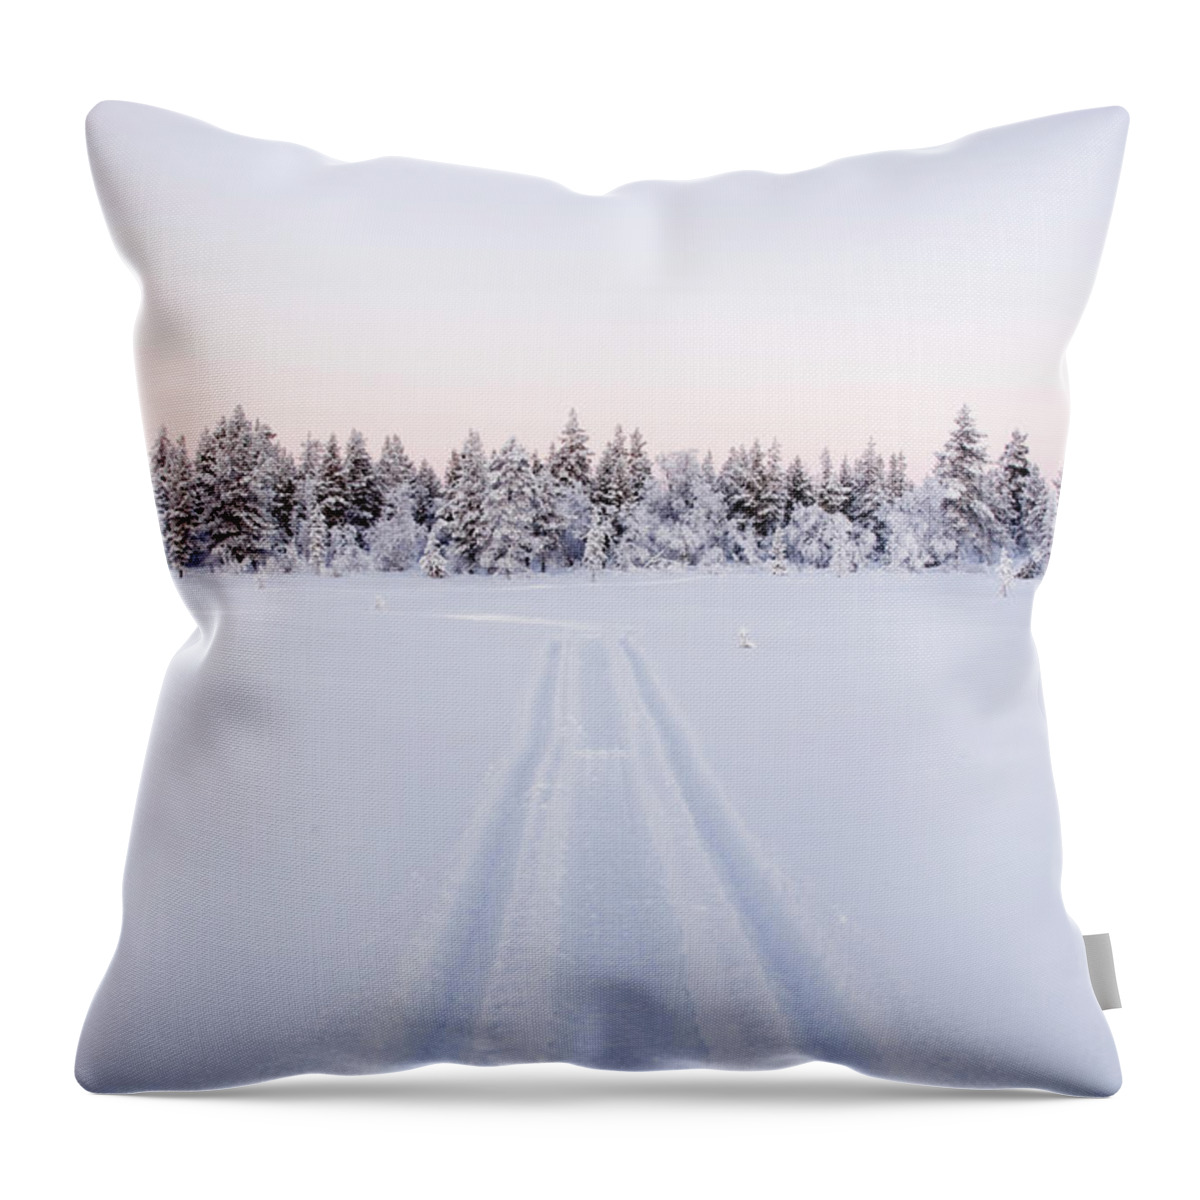 Extreme Terrain Throw Pillow featuring the photograph Snow-topped Forest With Snowmobile by Juhokuva